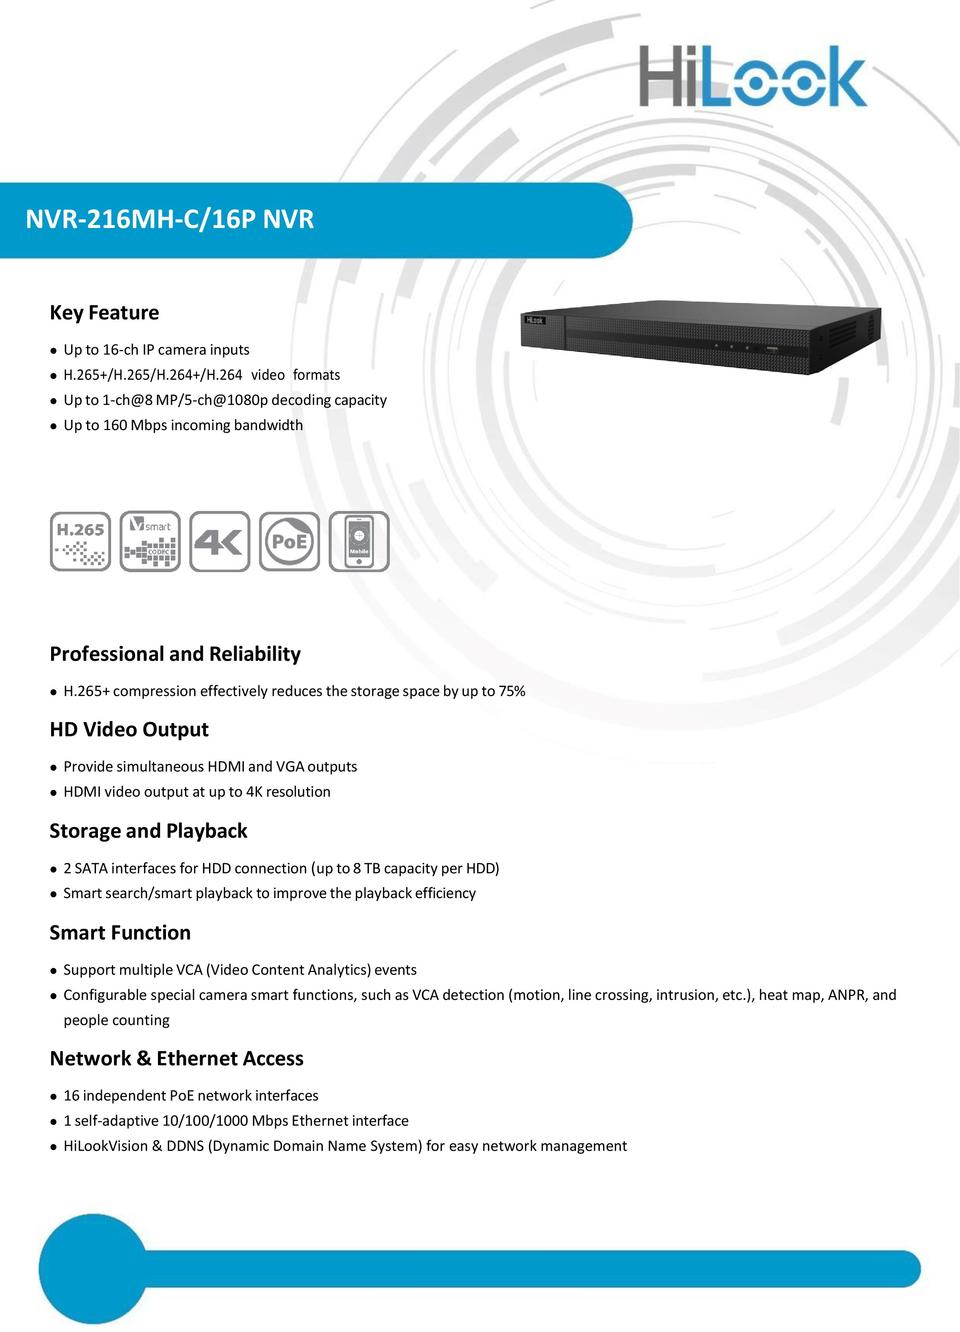 HiLook NVR-216MH-C/16P 16CH C Series NVR with 3TB HDD 0